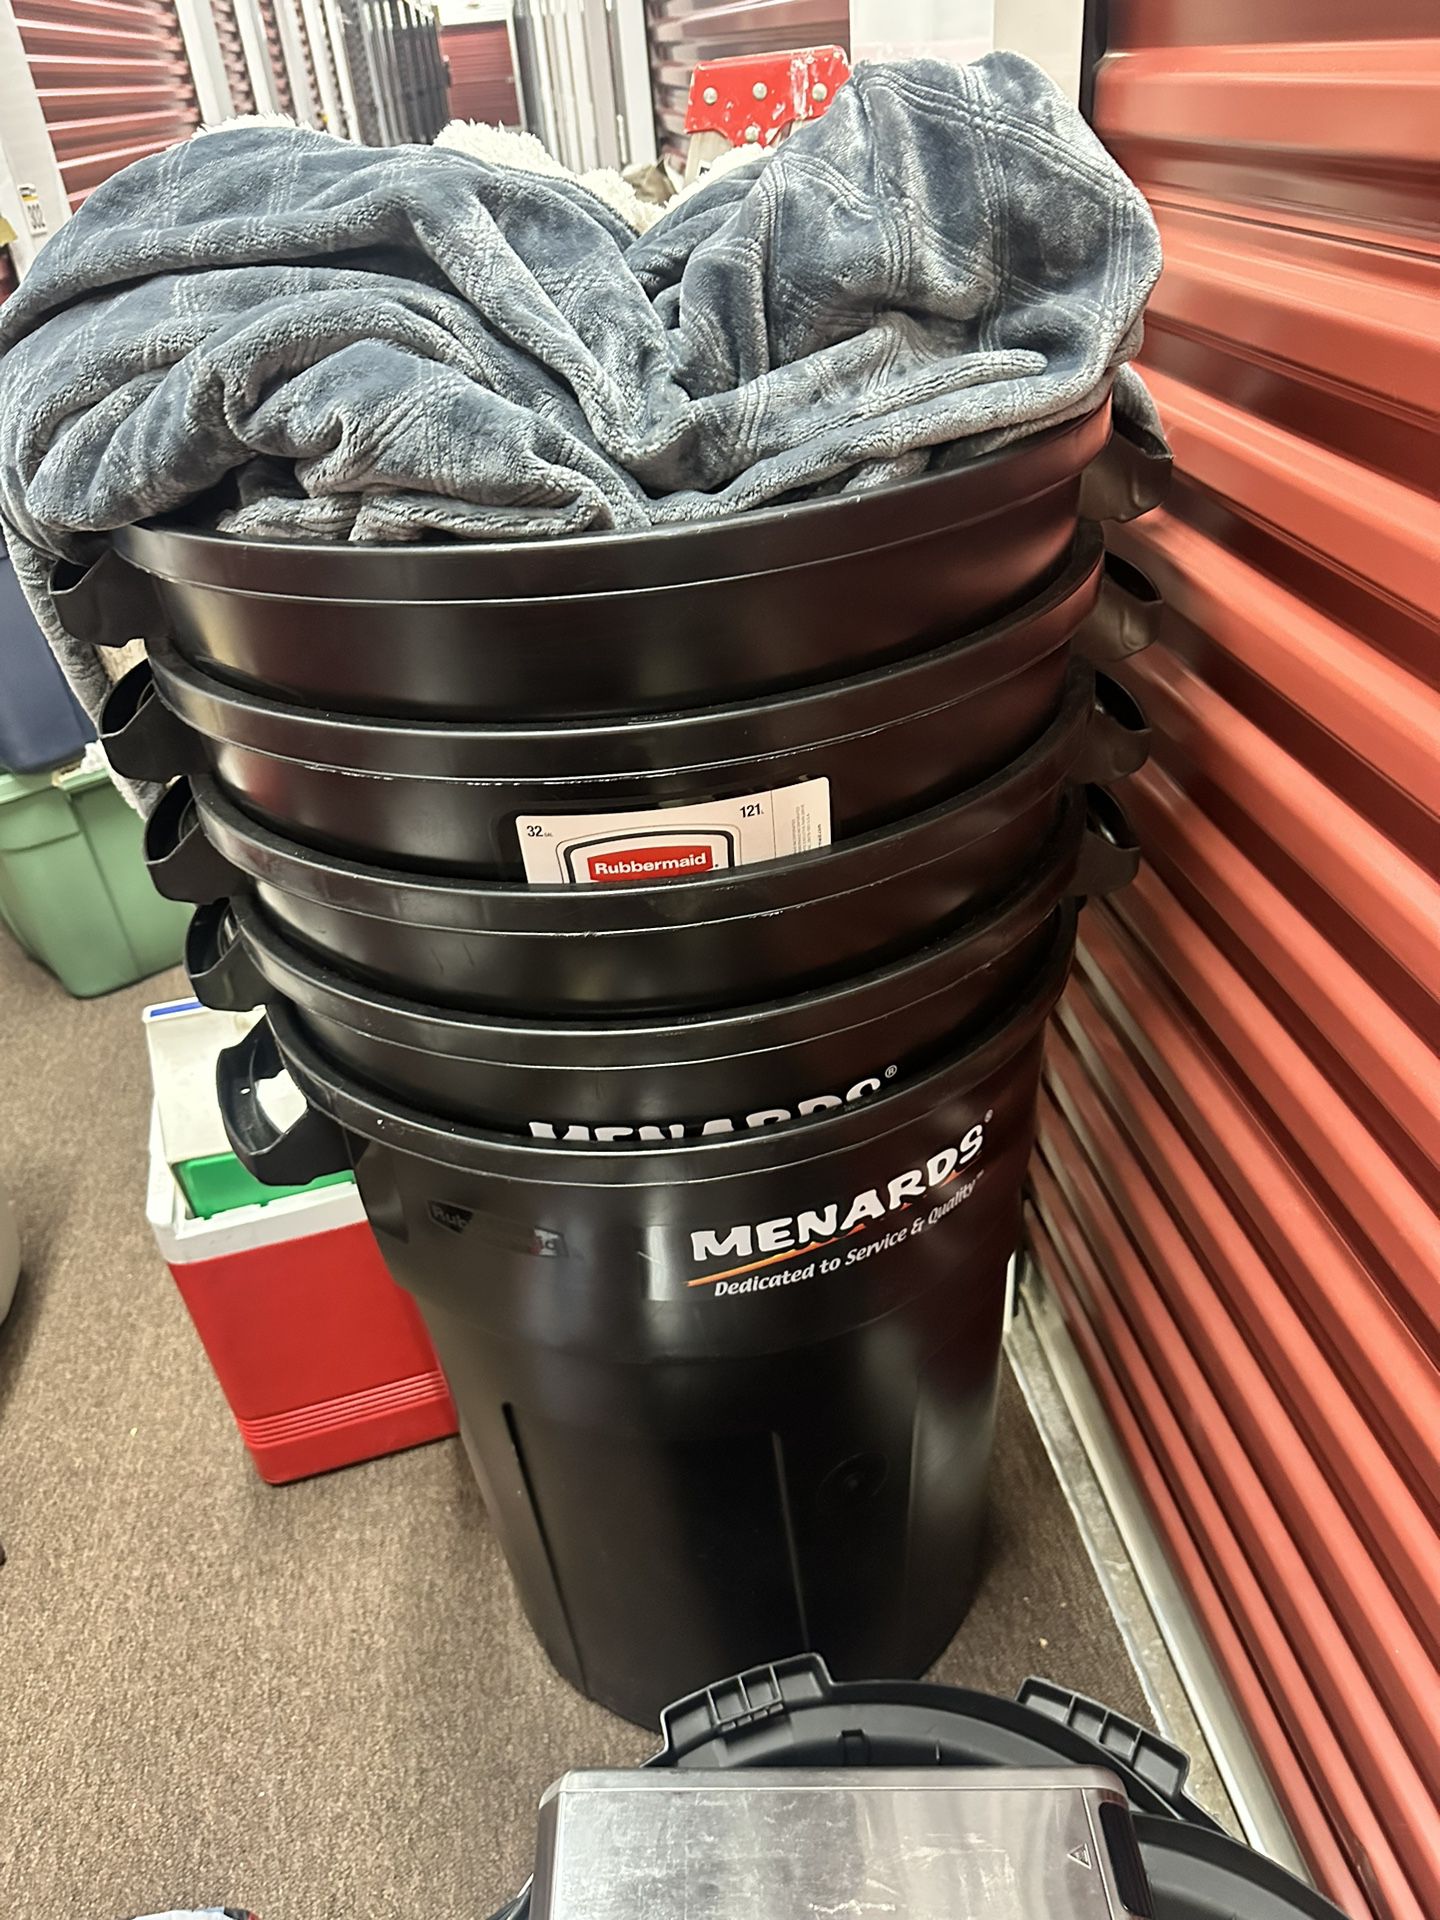 New Menards Rubbermaid Trash Cans